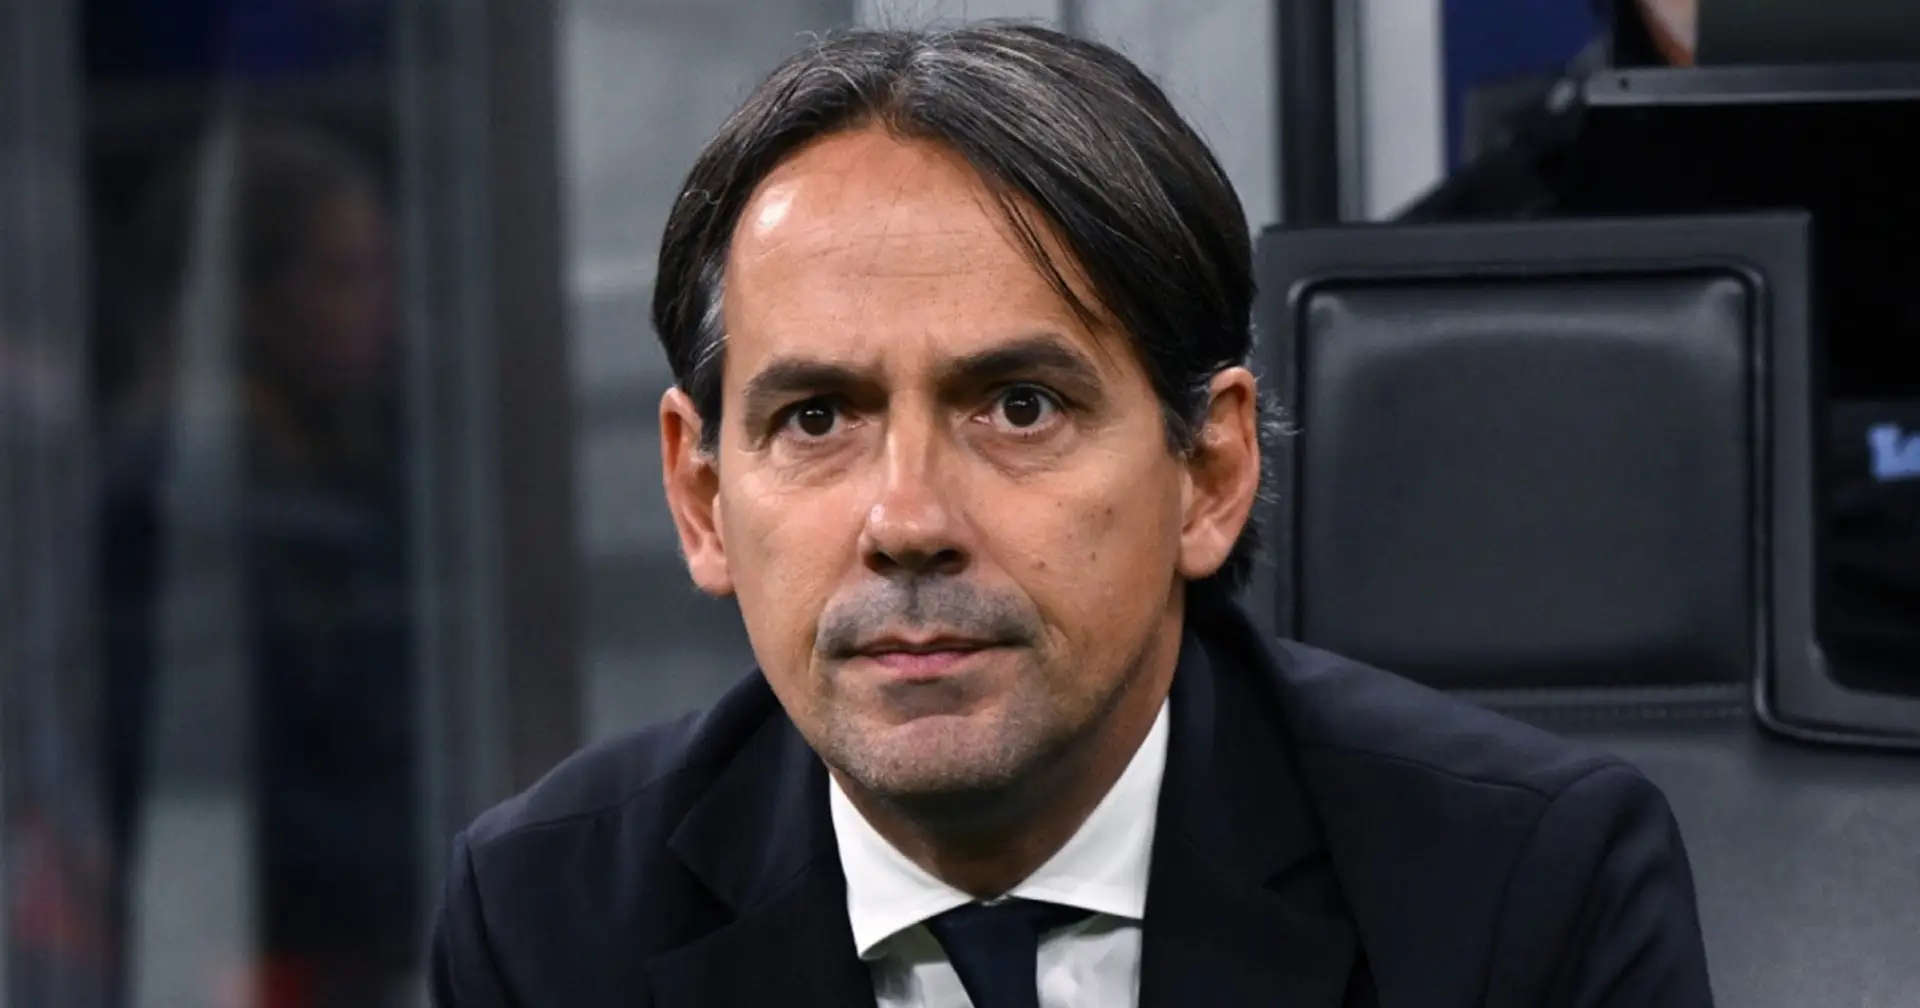 Simone Inzaghi emerges as potential Pochettino replacement (reliability: 4 stars)